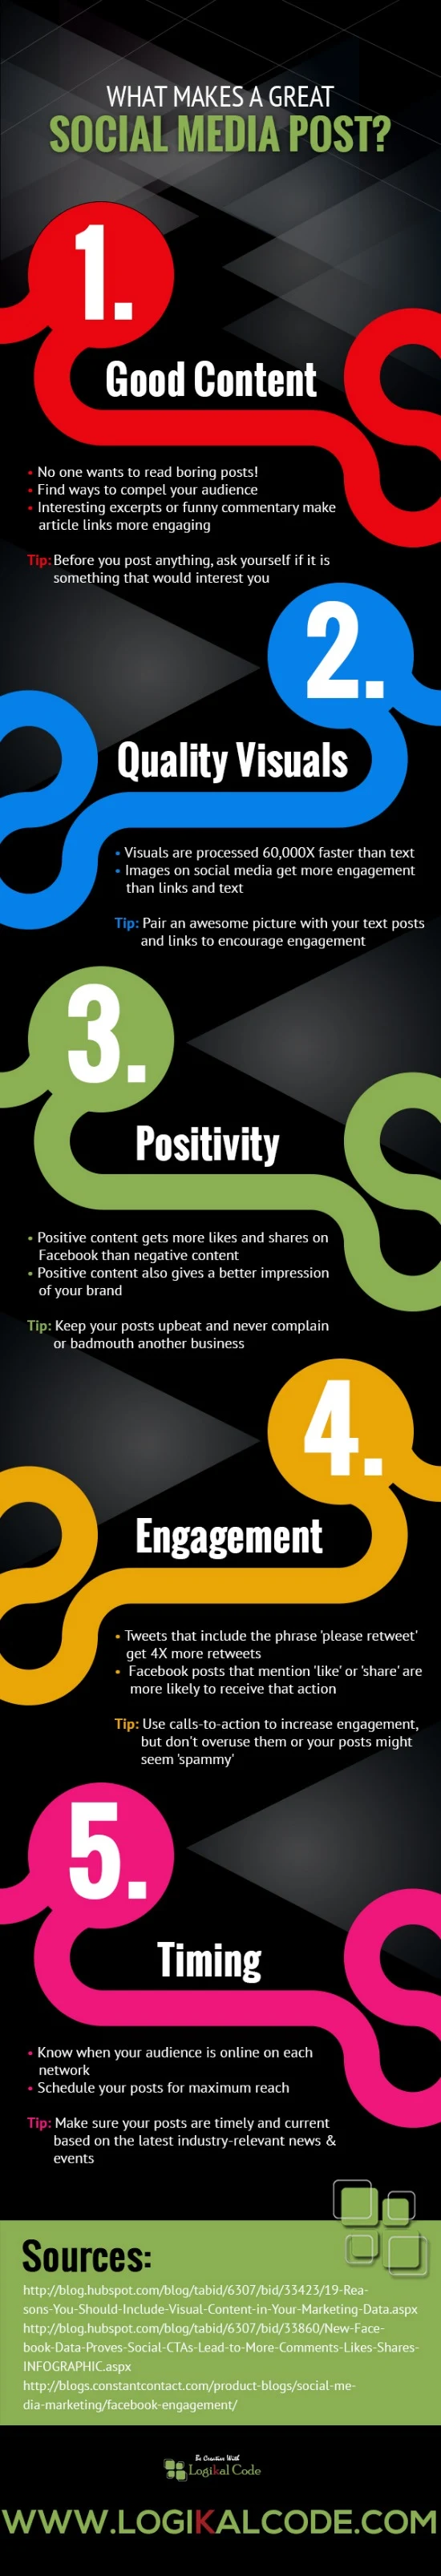 How To Create Good Social Media Posts - #infographic